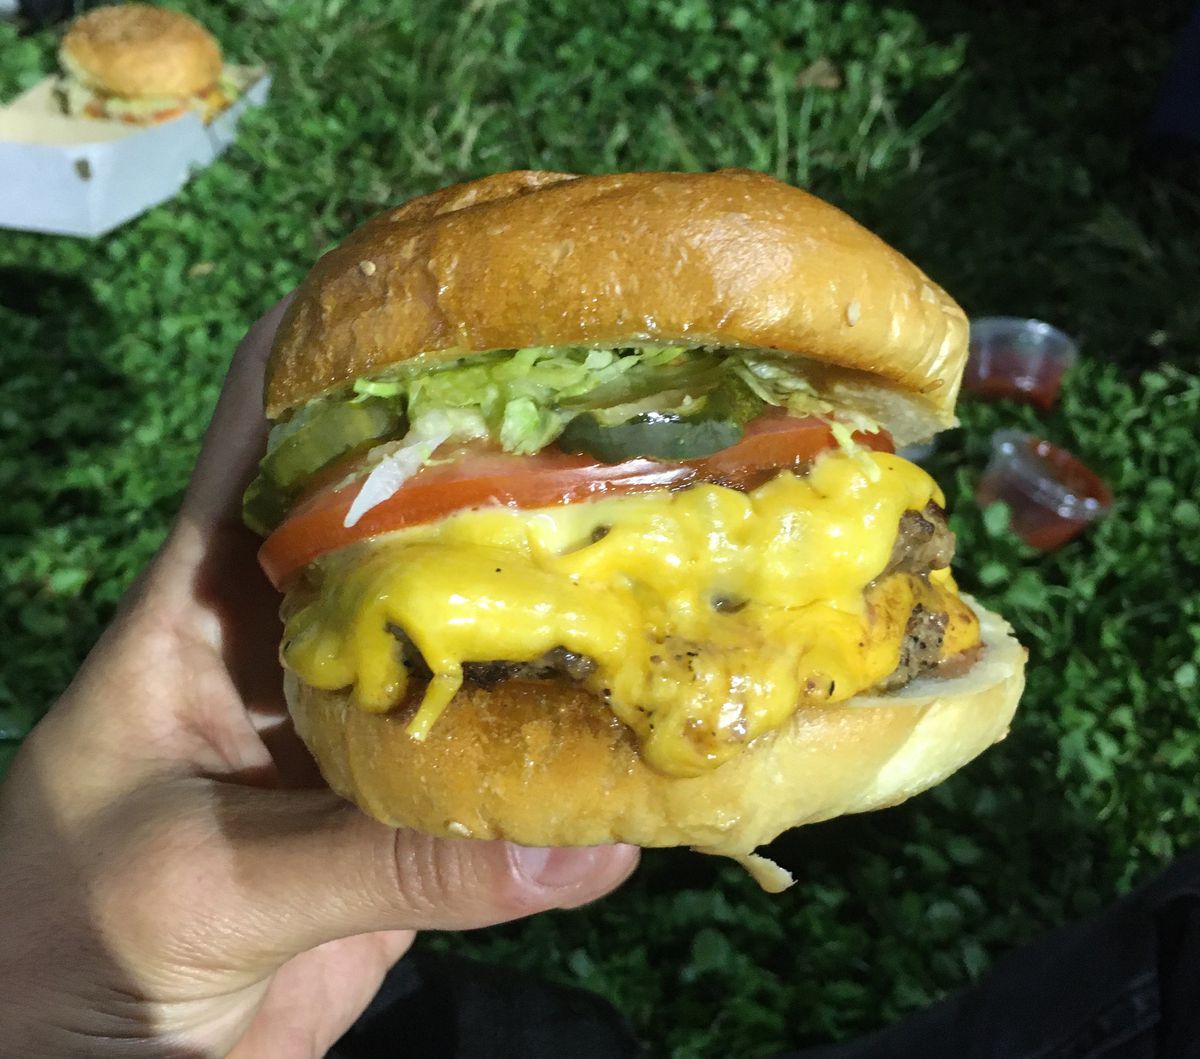 A hand holds a double cheeseburger overflowing with melty American cheese, scraps of lettuce, pickles, and tomato against a background of grass